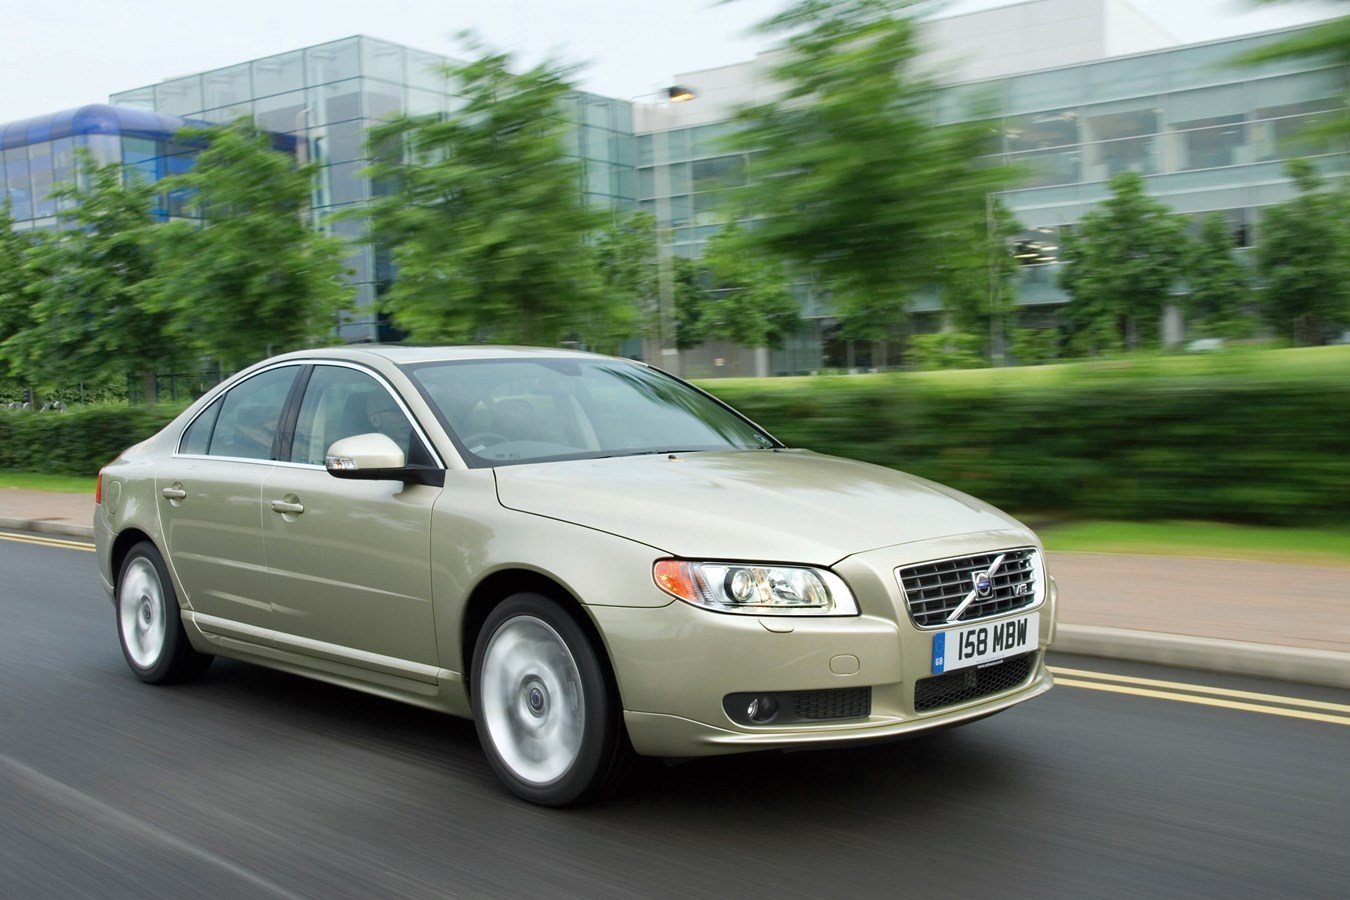 NEW VOLVO S80 WINS CHAUFFEUR APPROVAL AND NEW BUSINESS APPRAISAL